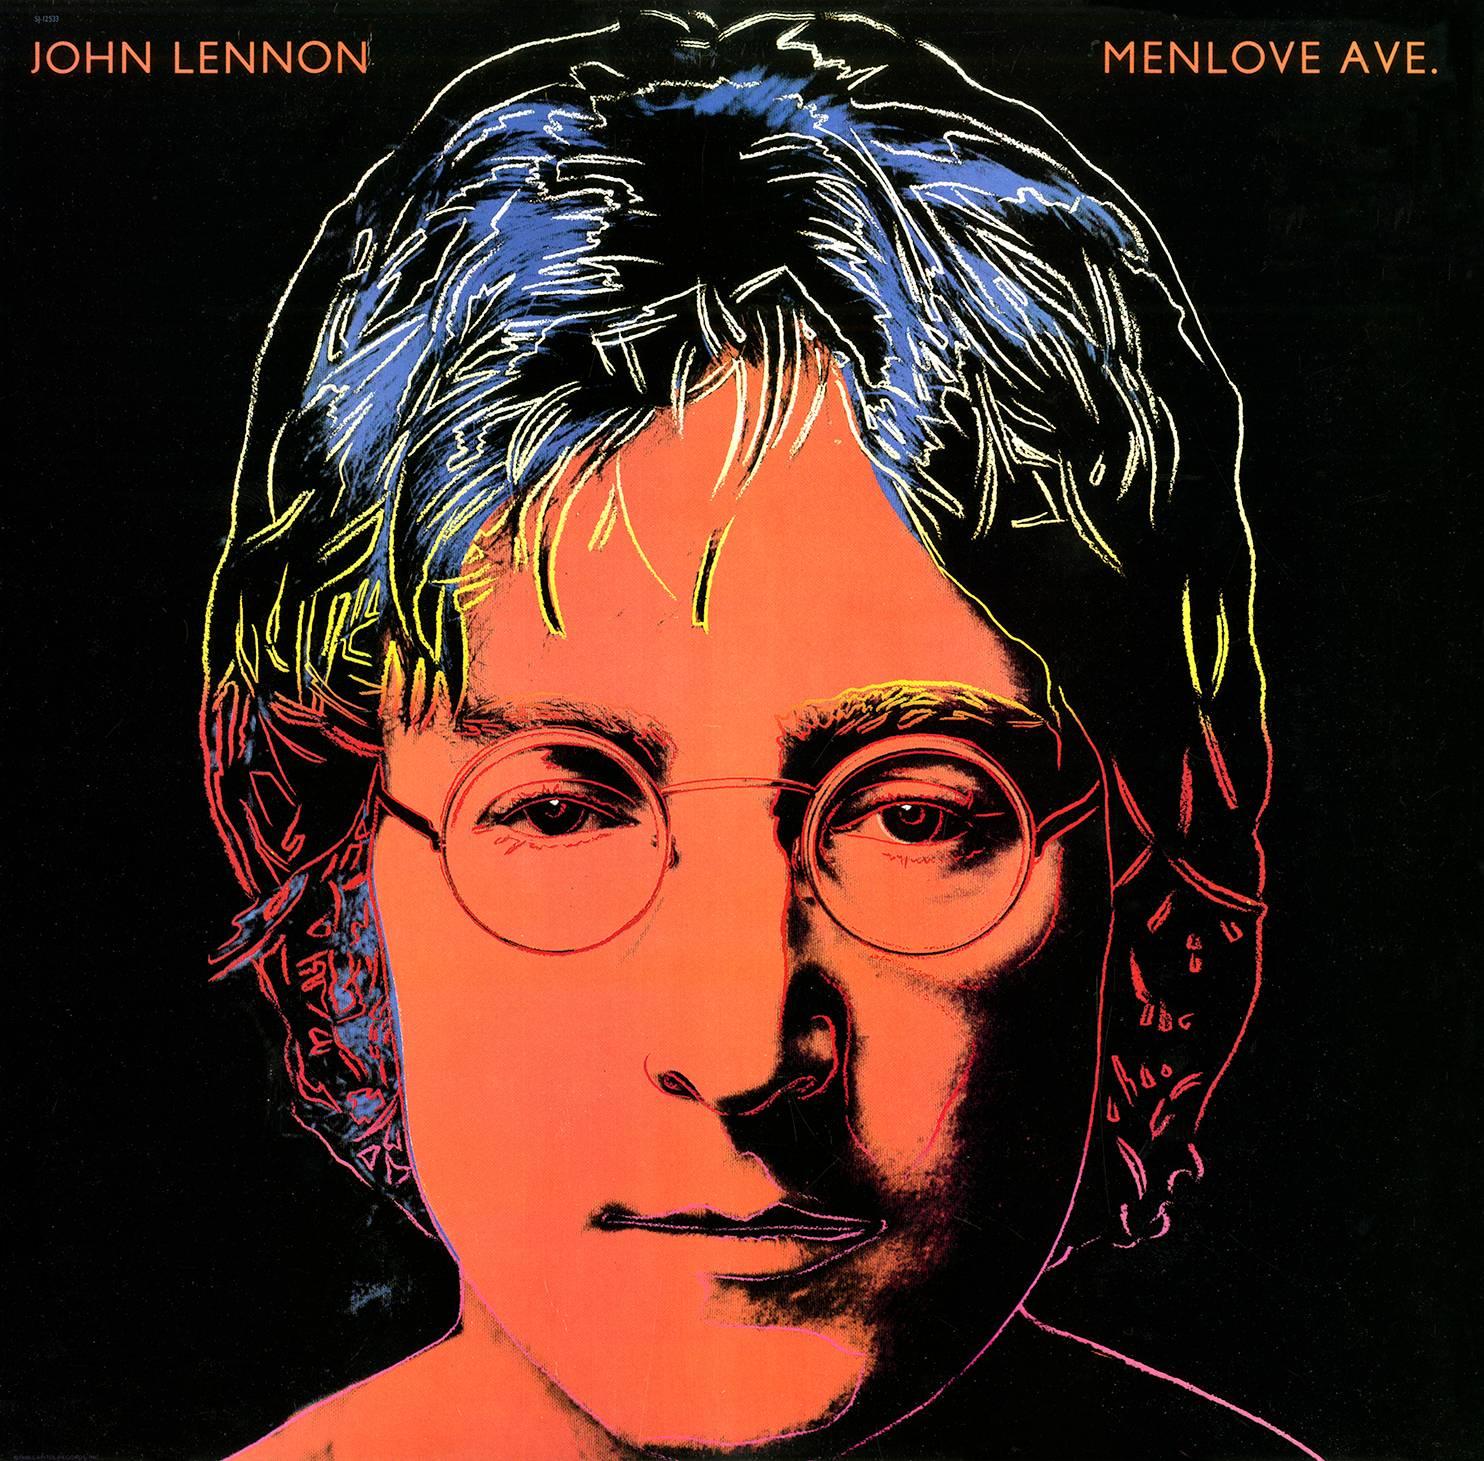 Andy Warhol John Lennon Record Cover Art:
Offset illustrated by Andy Warhol shortly before his death in 1986 for the estate of John Lennon/Capital Records. Literature/references: Andy Warhol: The Complete Commissioned Record Covers by Paul Marechal.